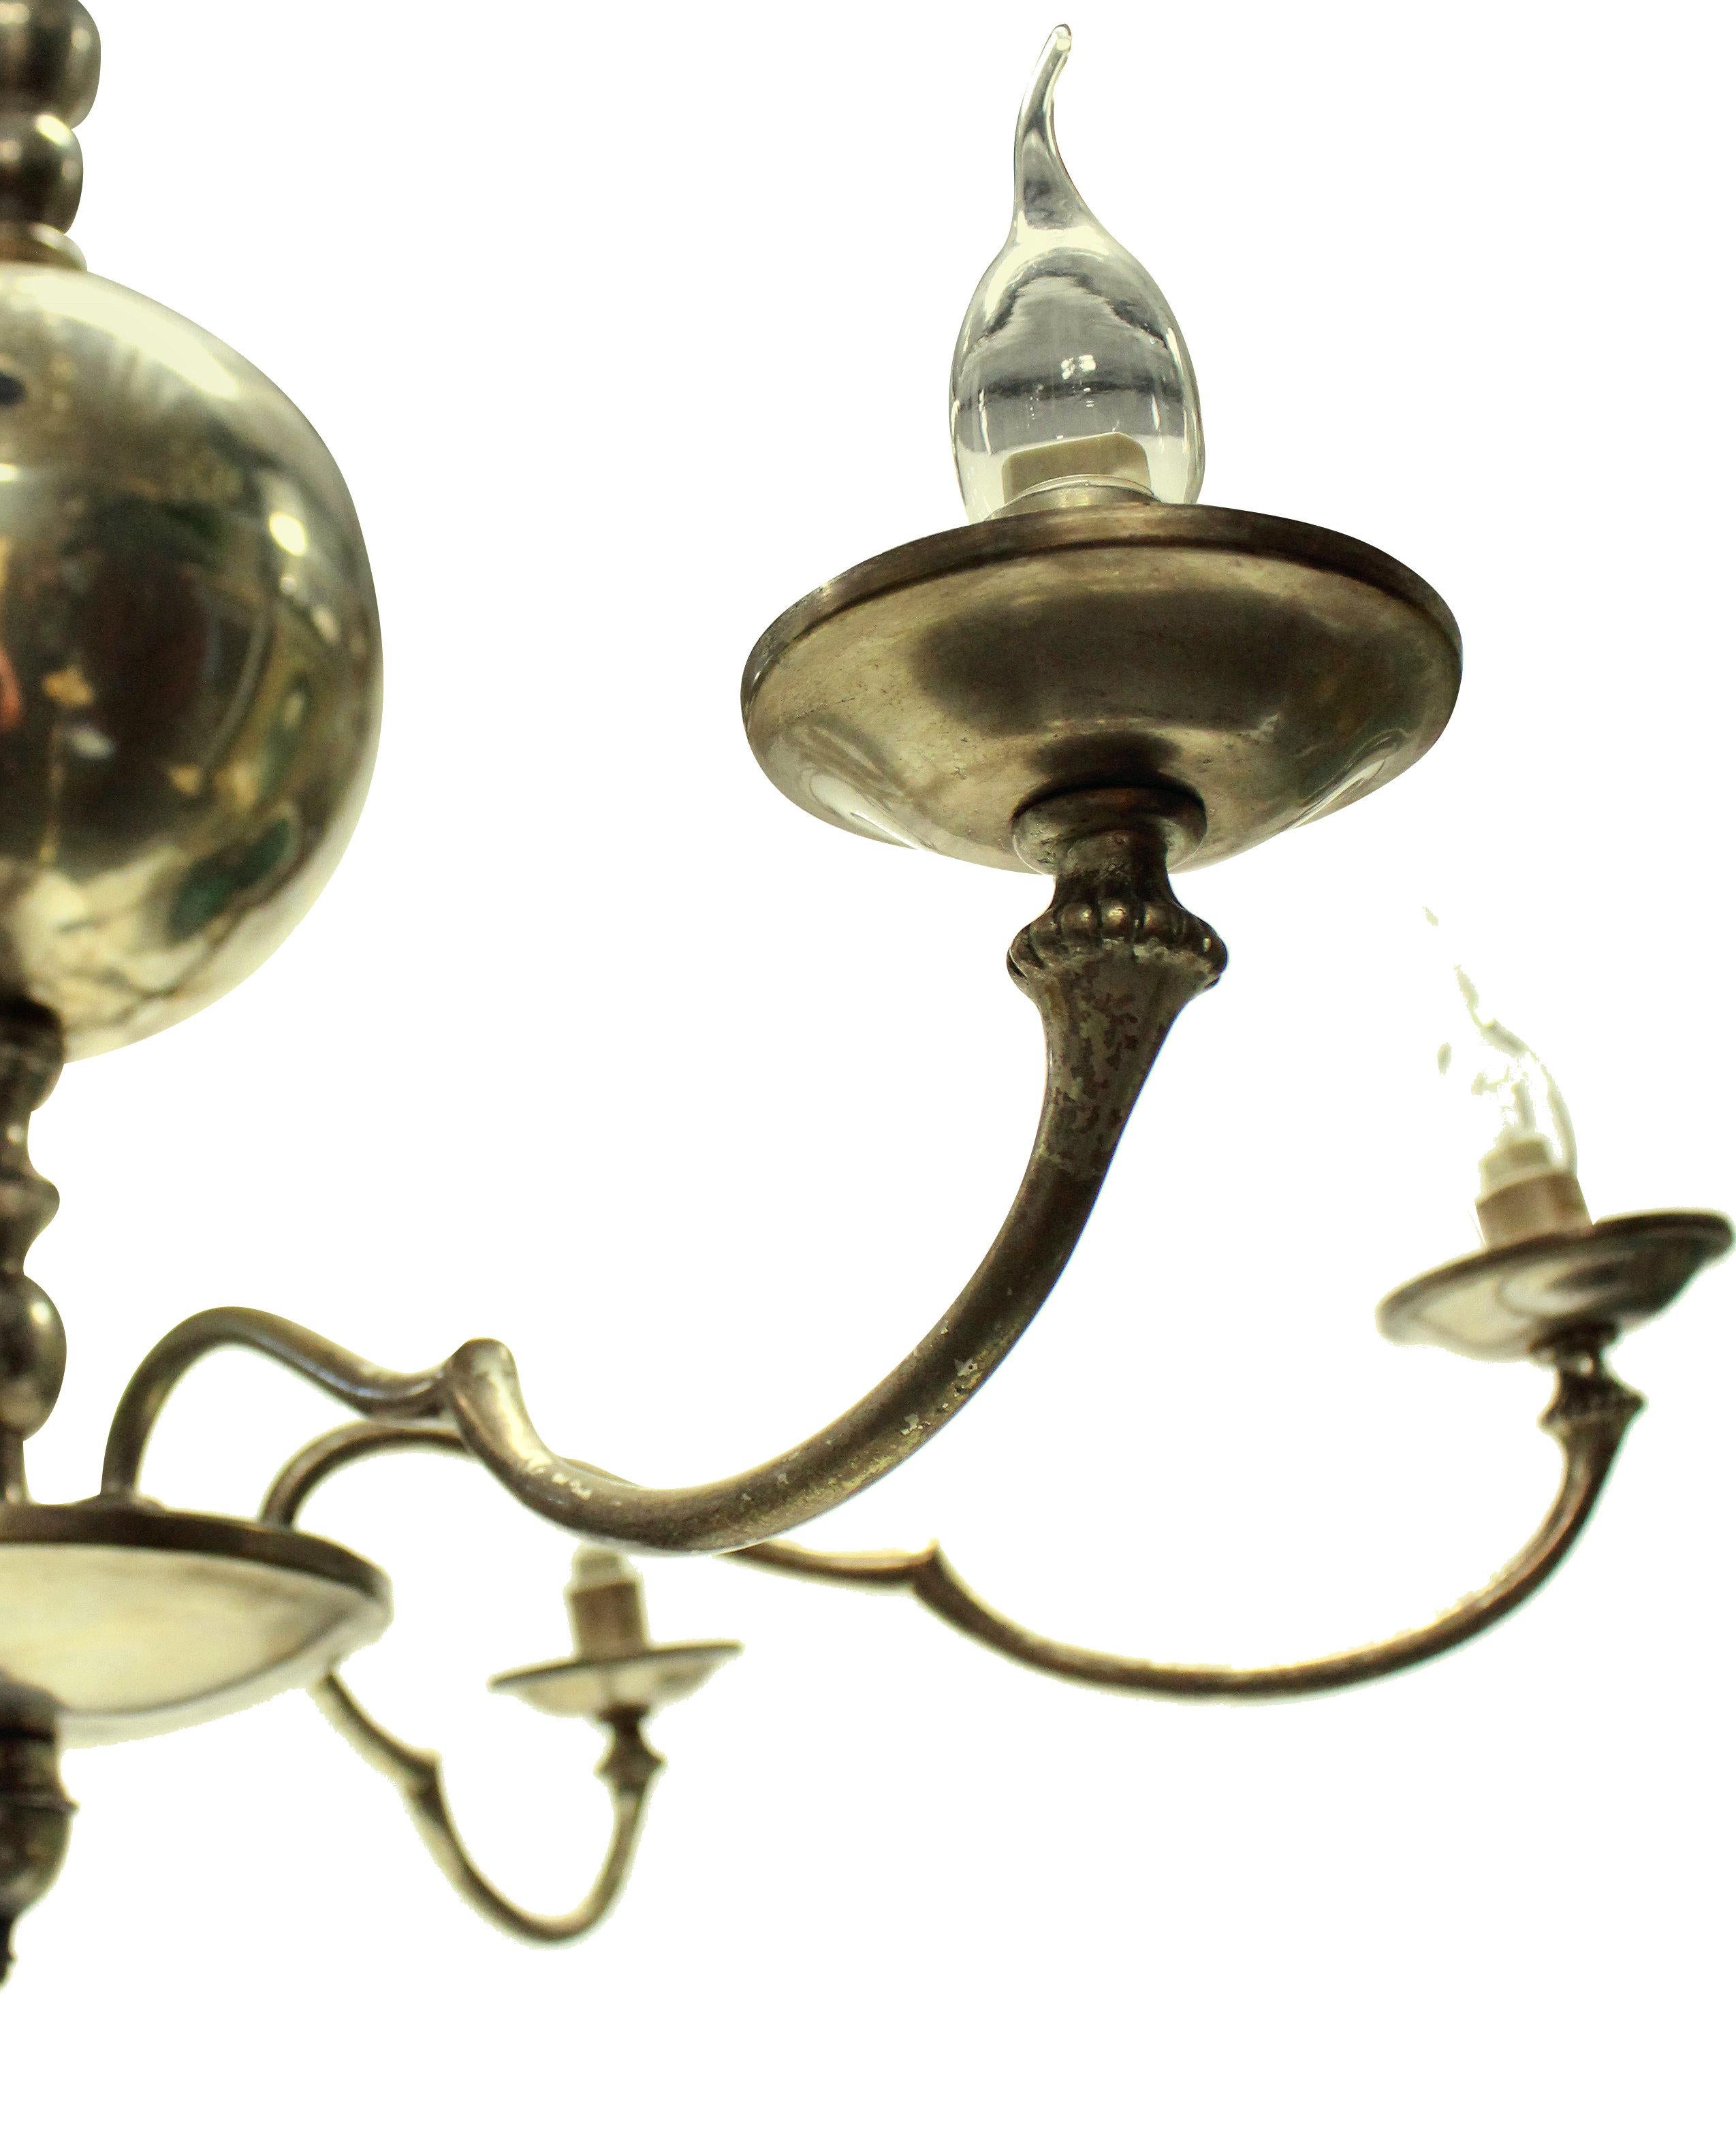 A French mid-century silver plated chandelier comprising six arms with a spherical central stem.